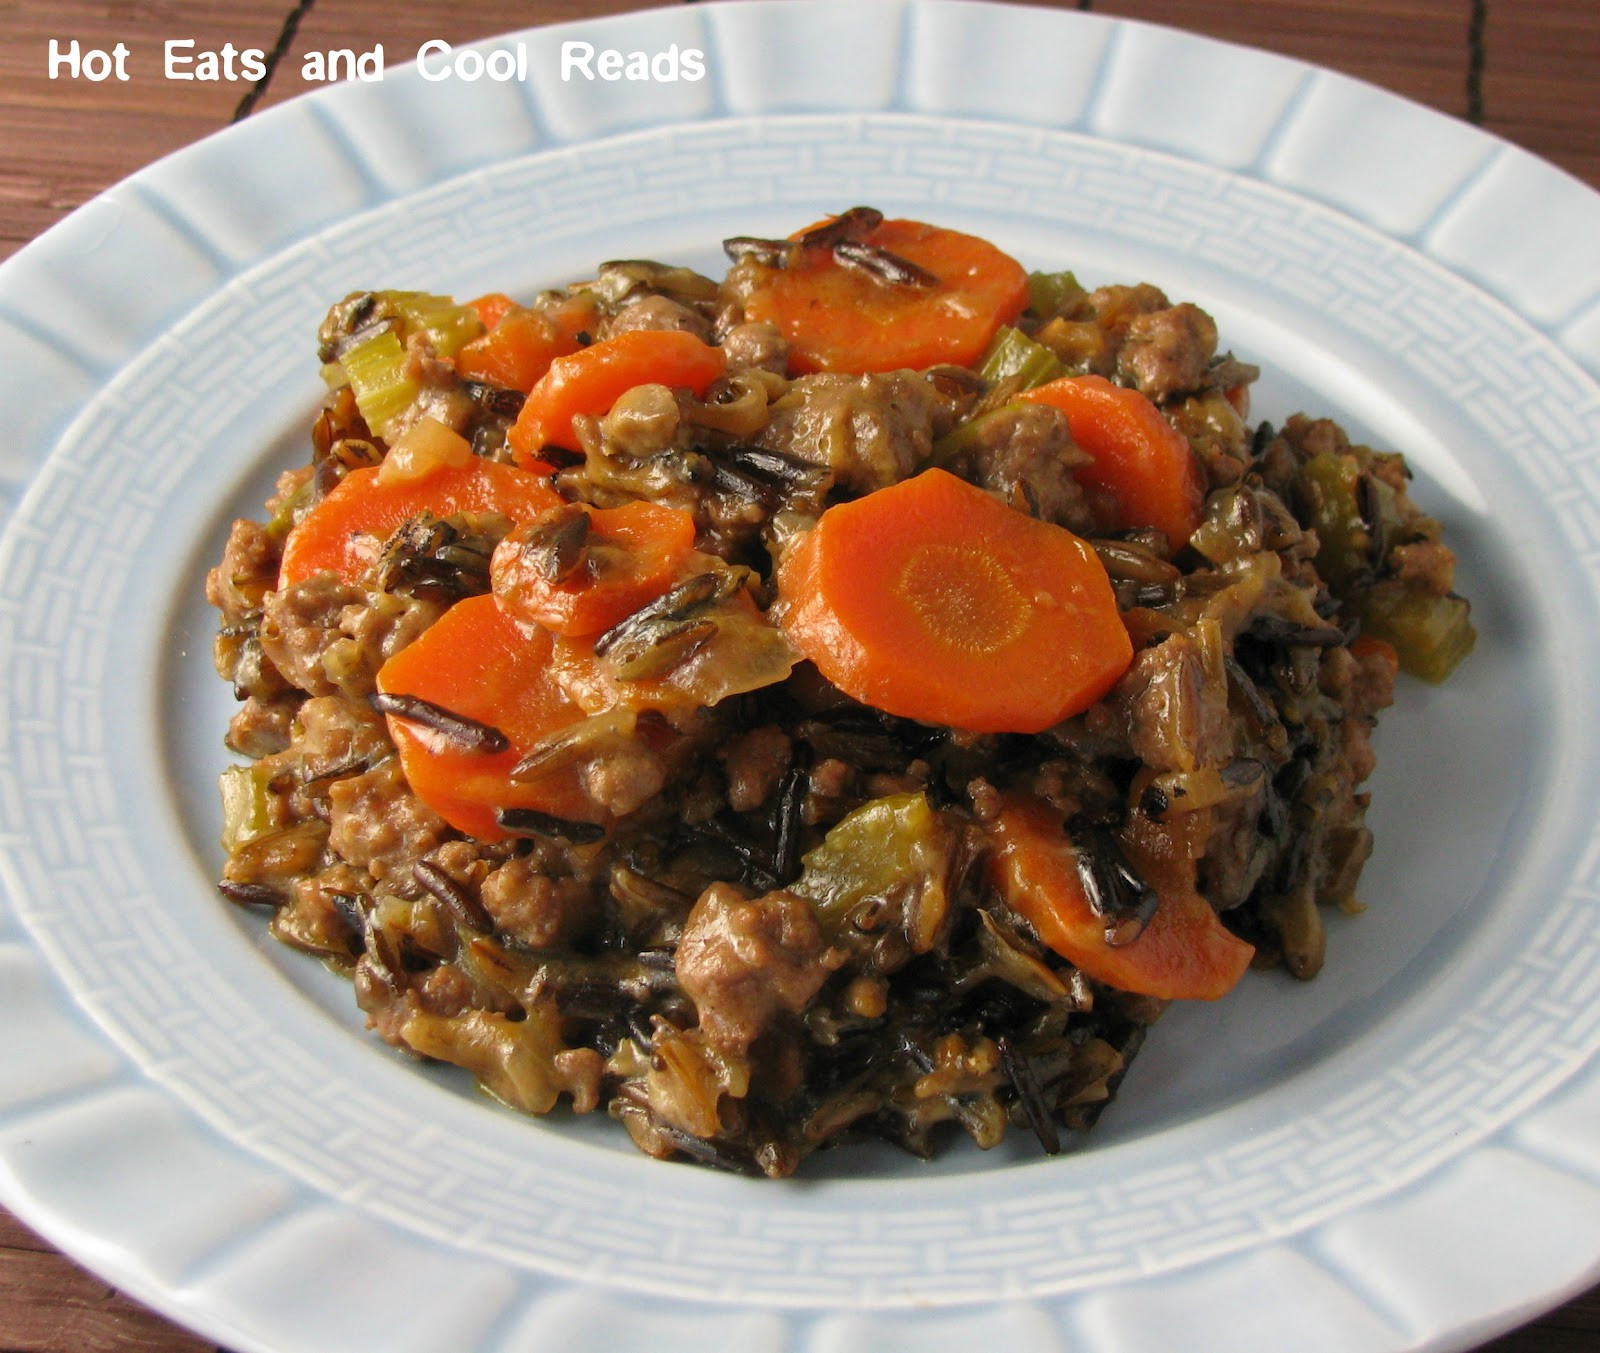 Minnesota Wild Rice
 Hot Eats and Cool Reads Minnesota Wild Rice Hotdish Recipe